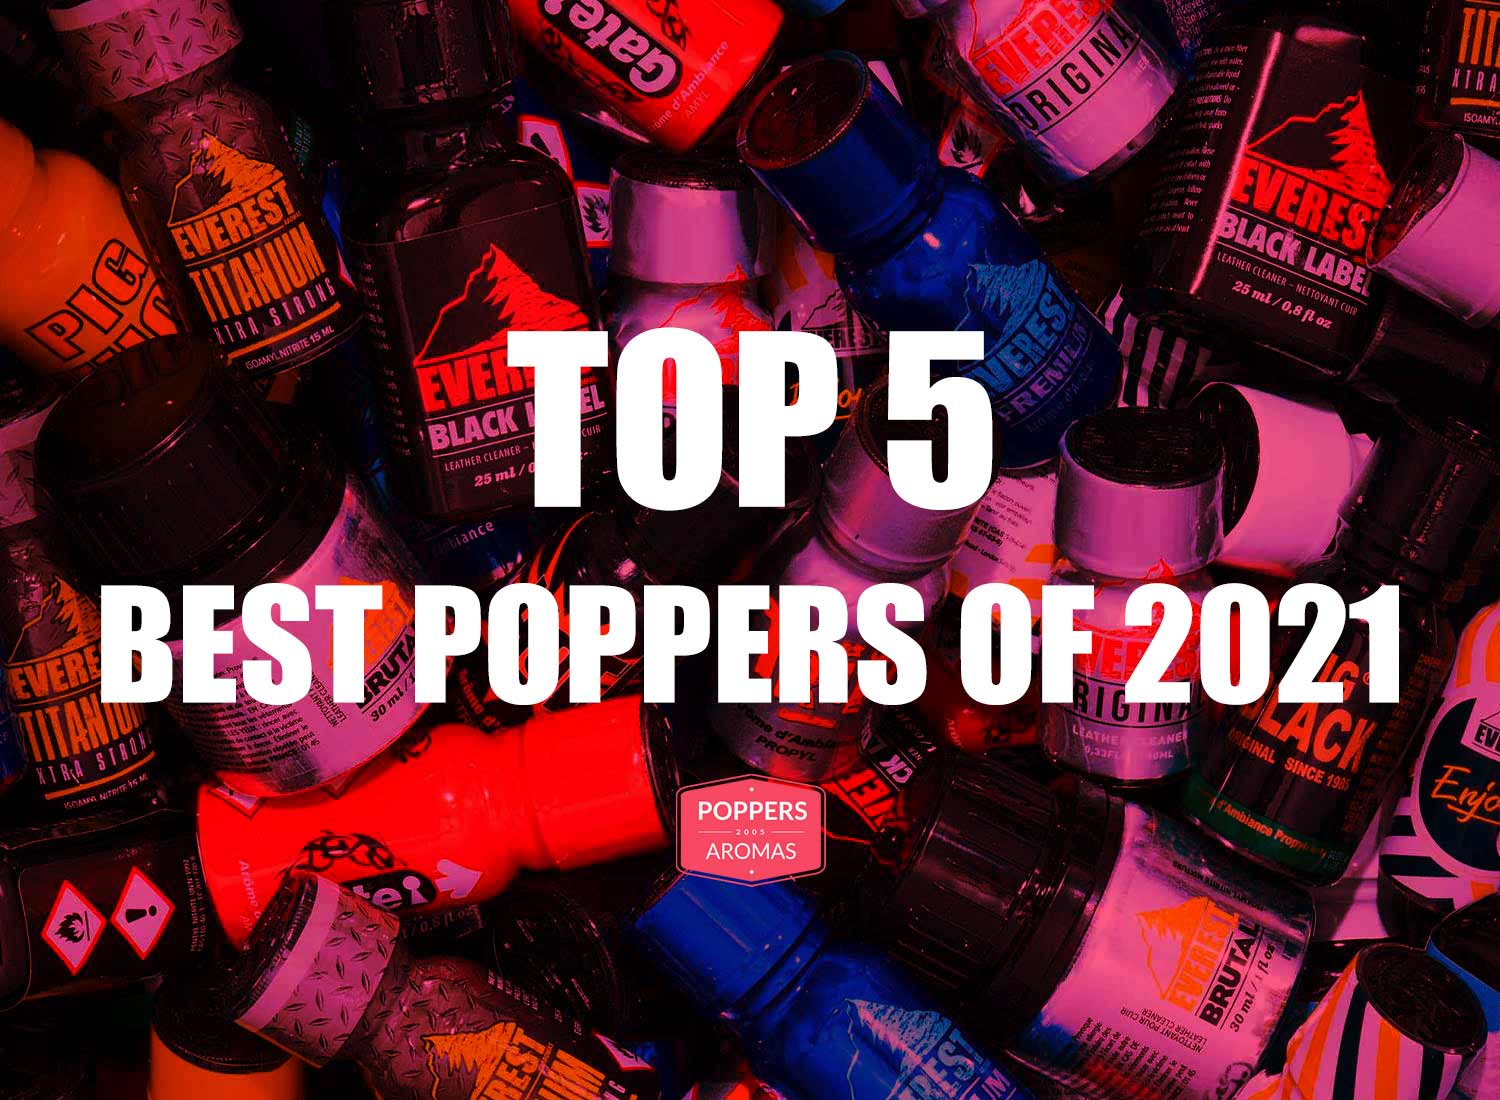 You are currently viewing Top 5 Best Poppers of 2021 on Poppers Aromas